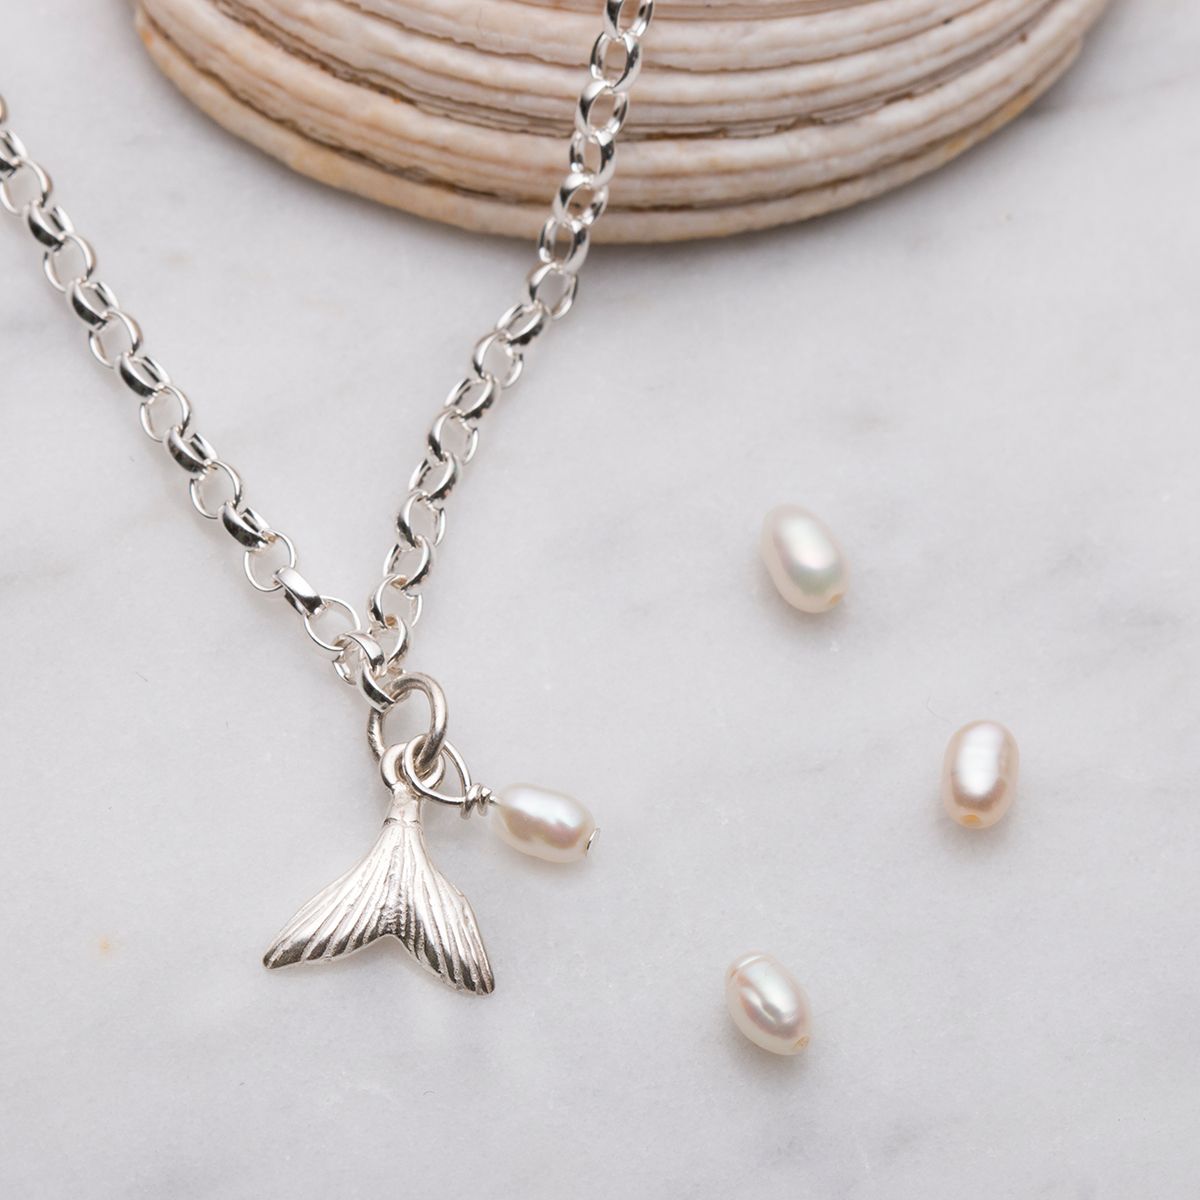 Mermaid Tail & Pearl Necklace